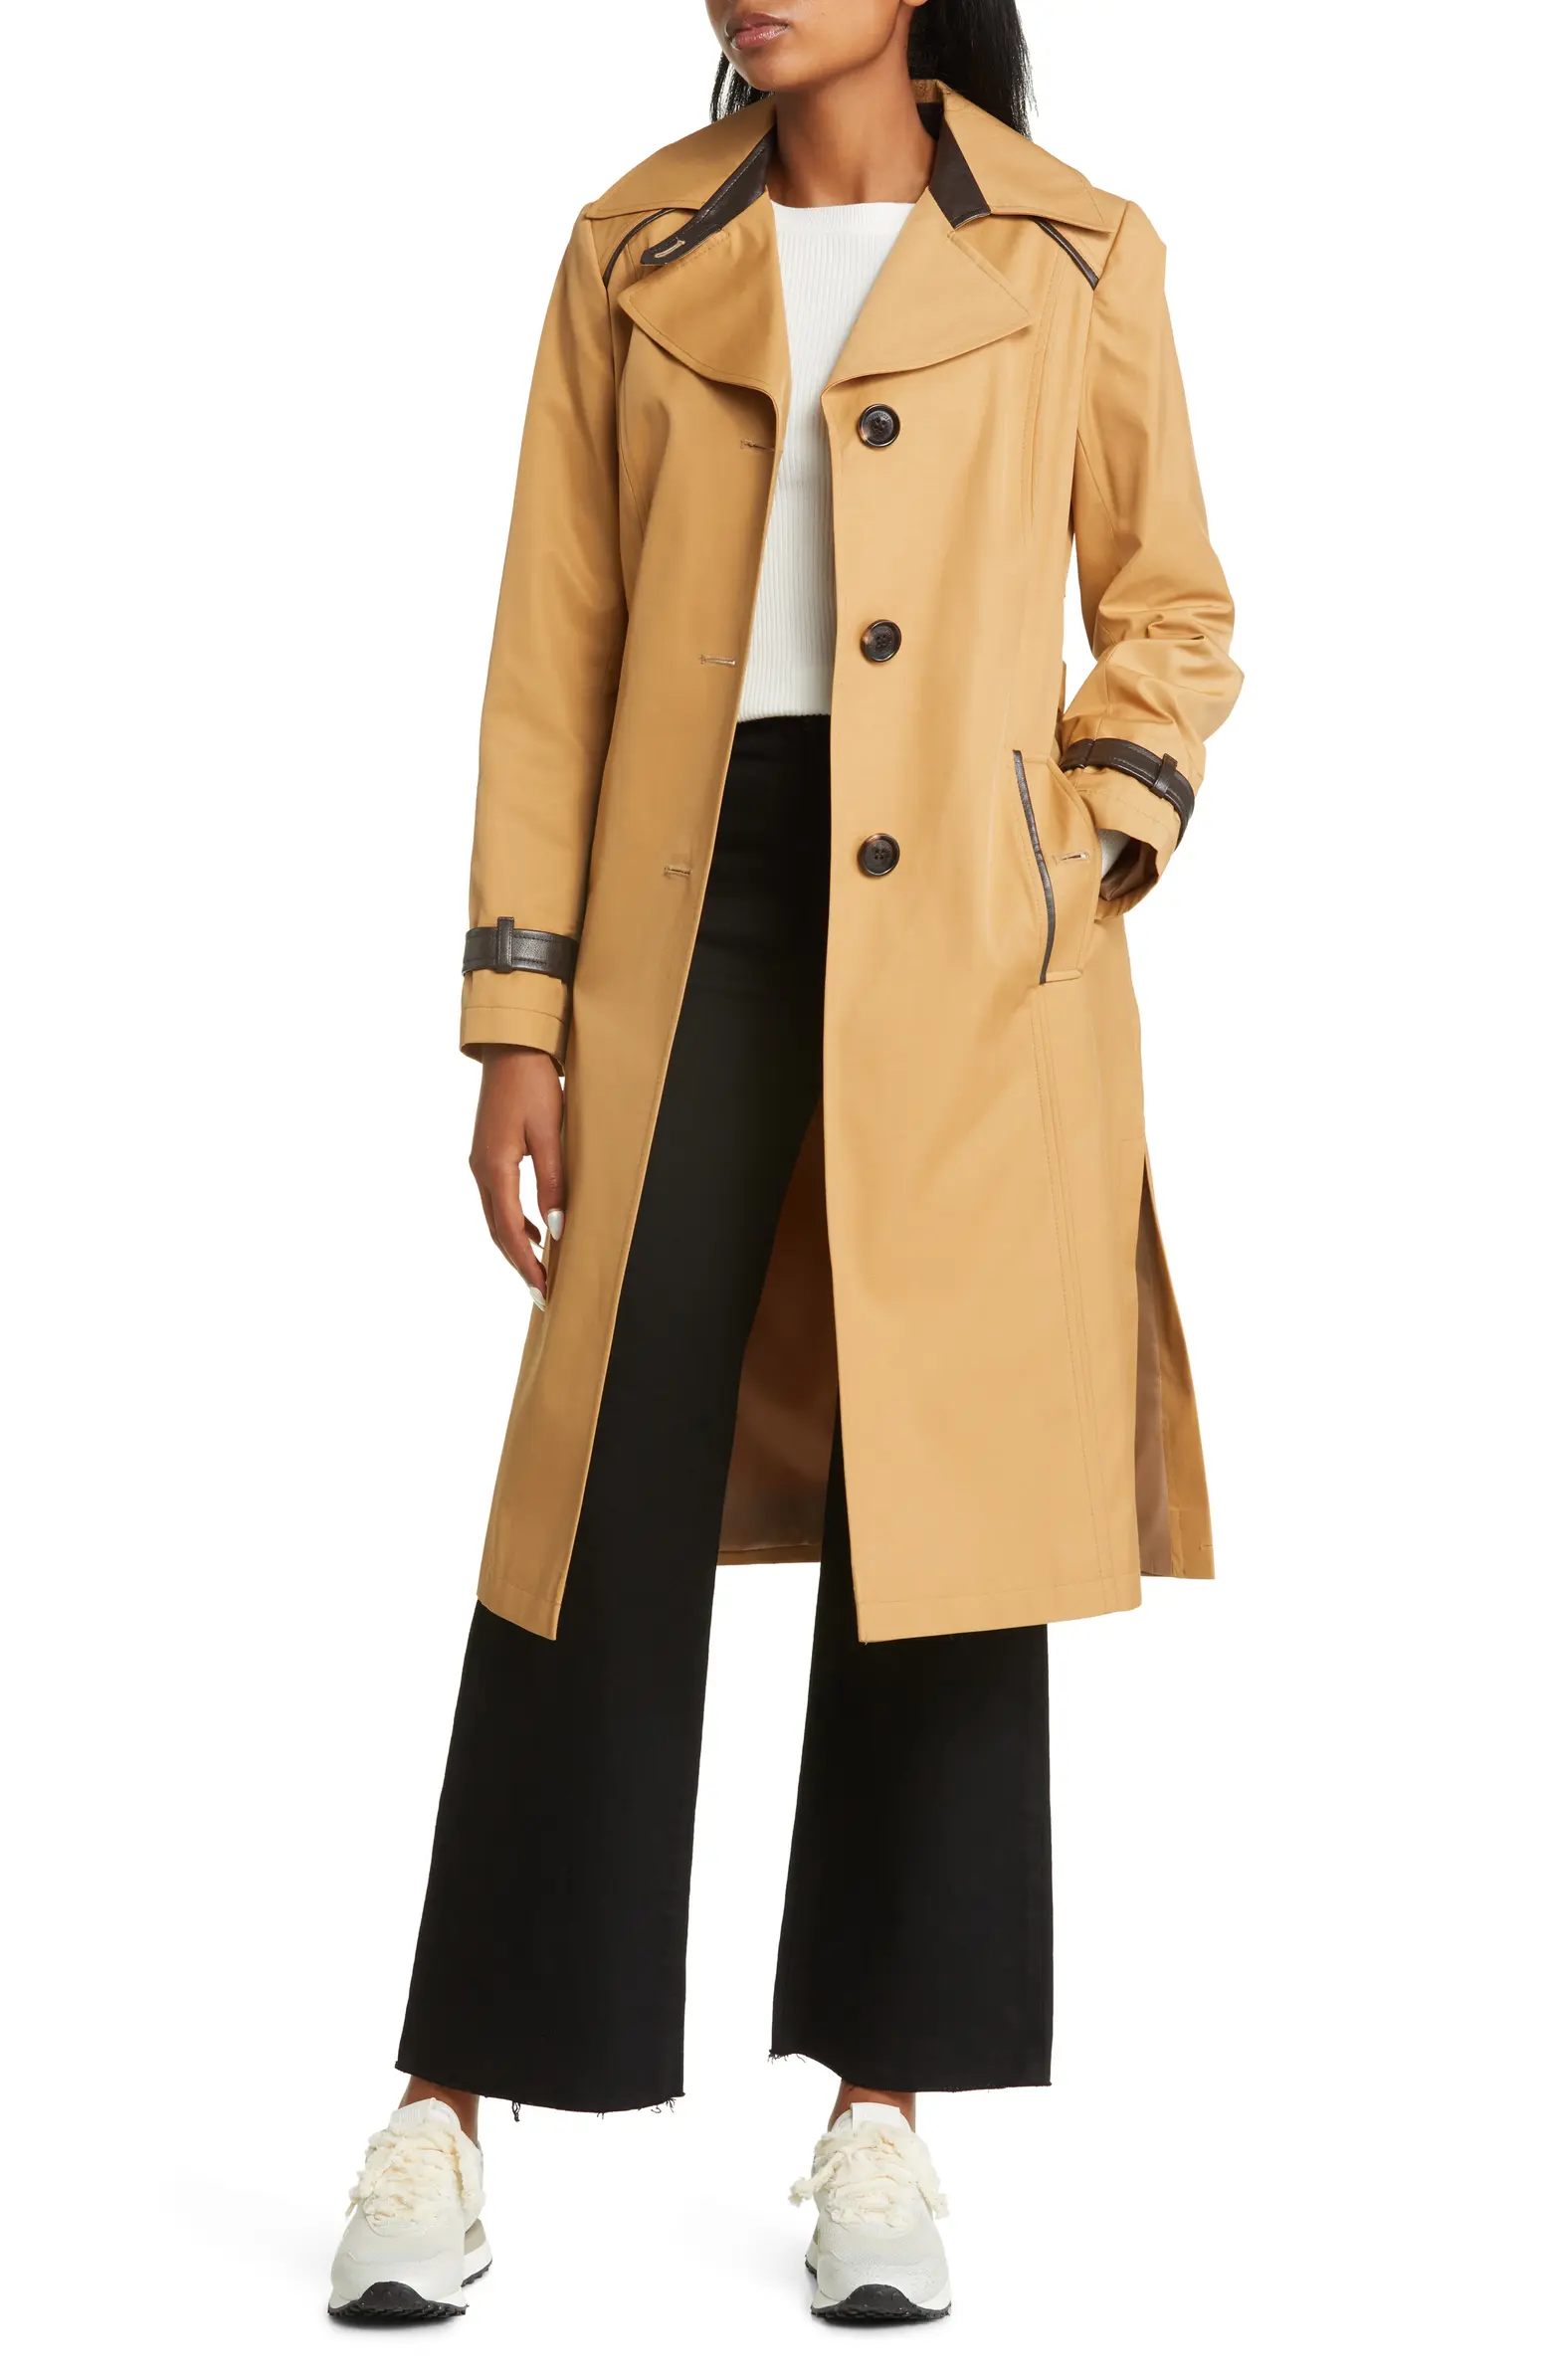 Winter Coats We Love That Are On Sale water repellant trench coat fun trench coats for winter affordable trench coat for winter cute trench coat